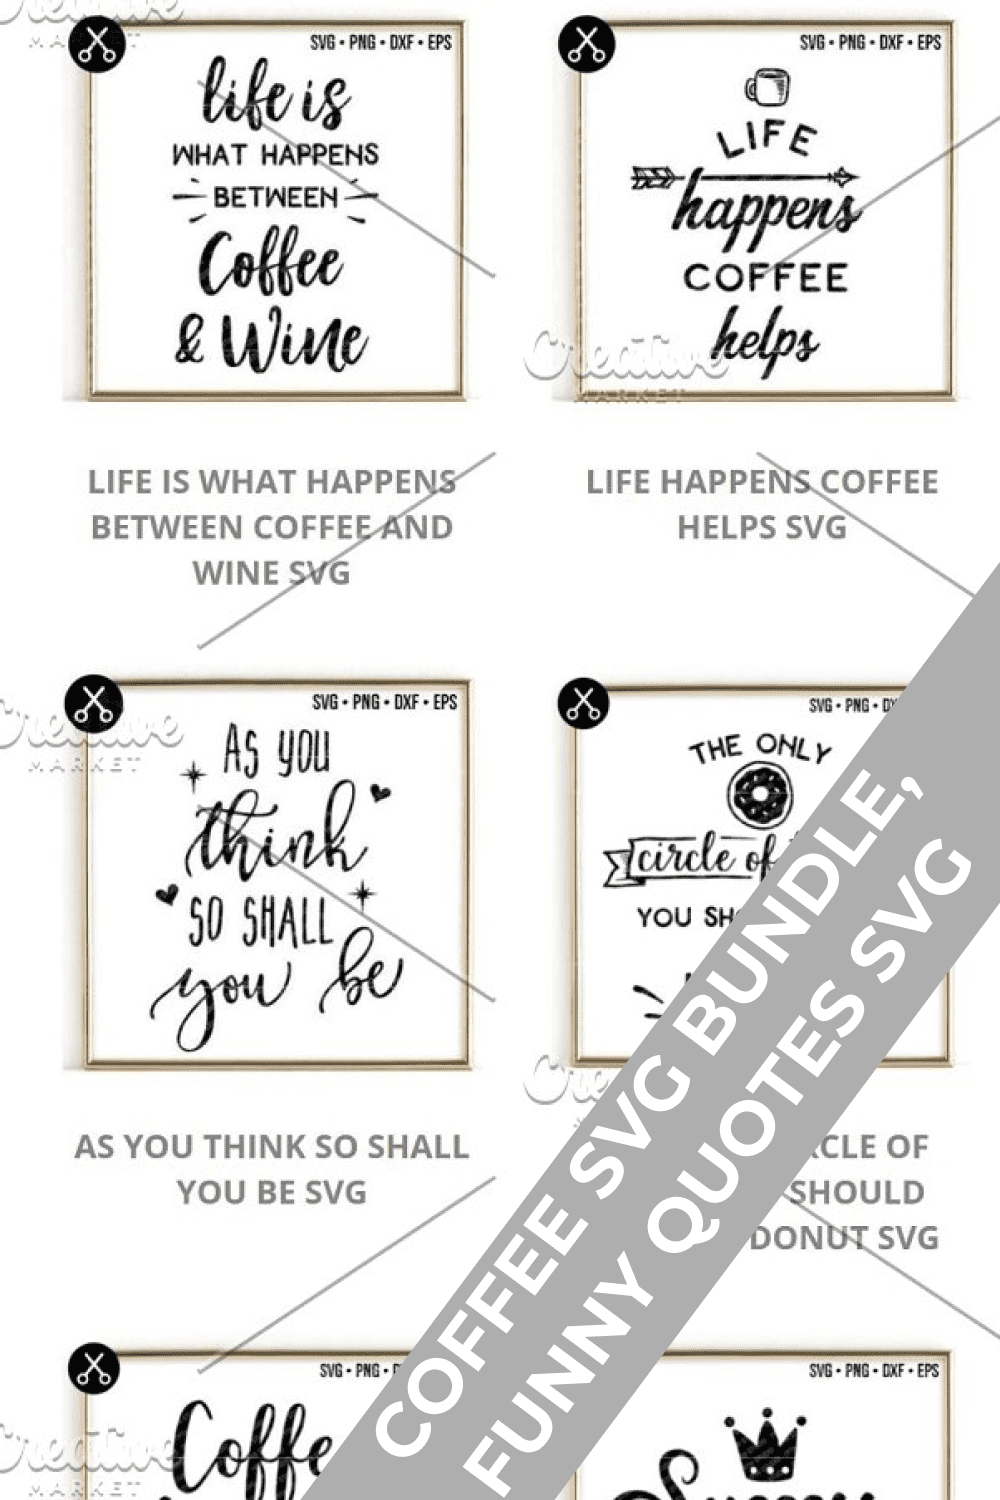 Big collection of coffee quotes.